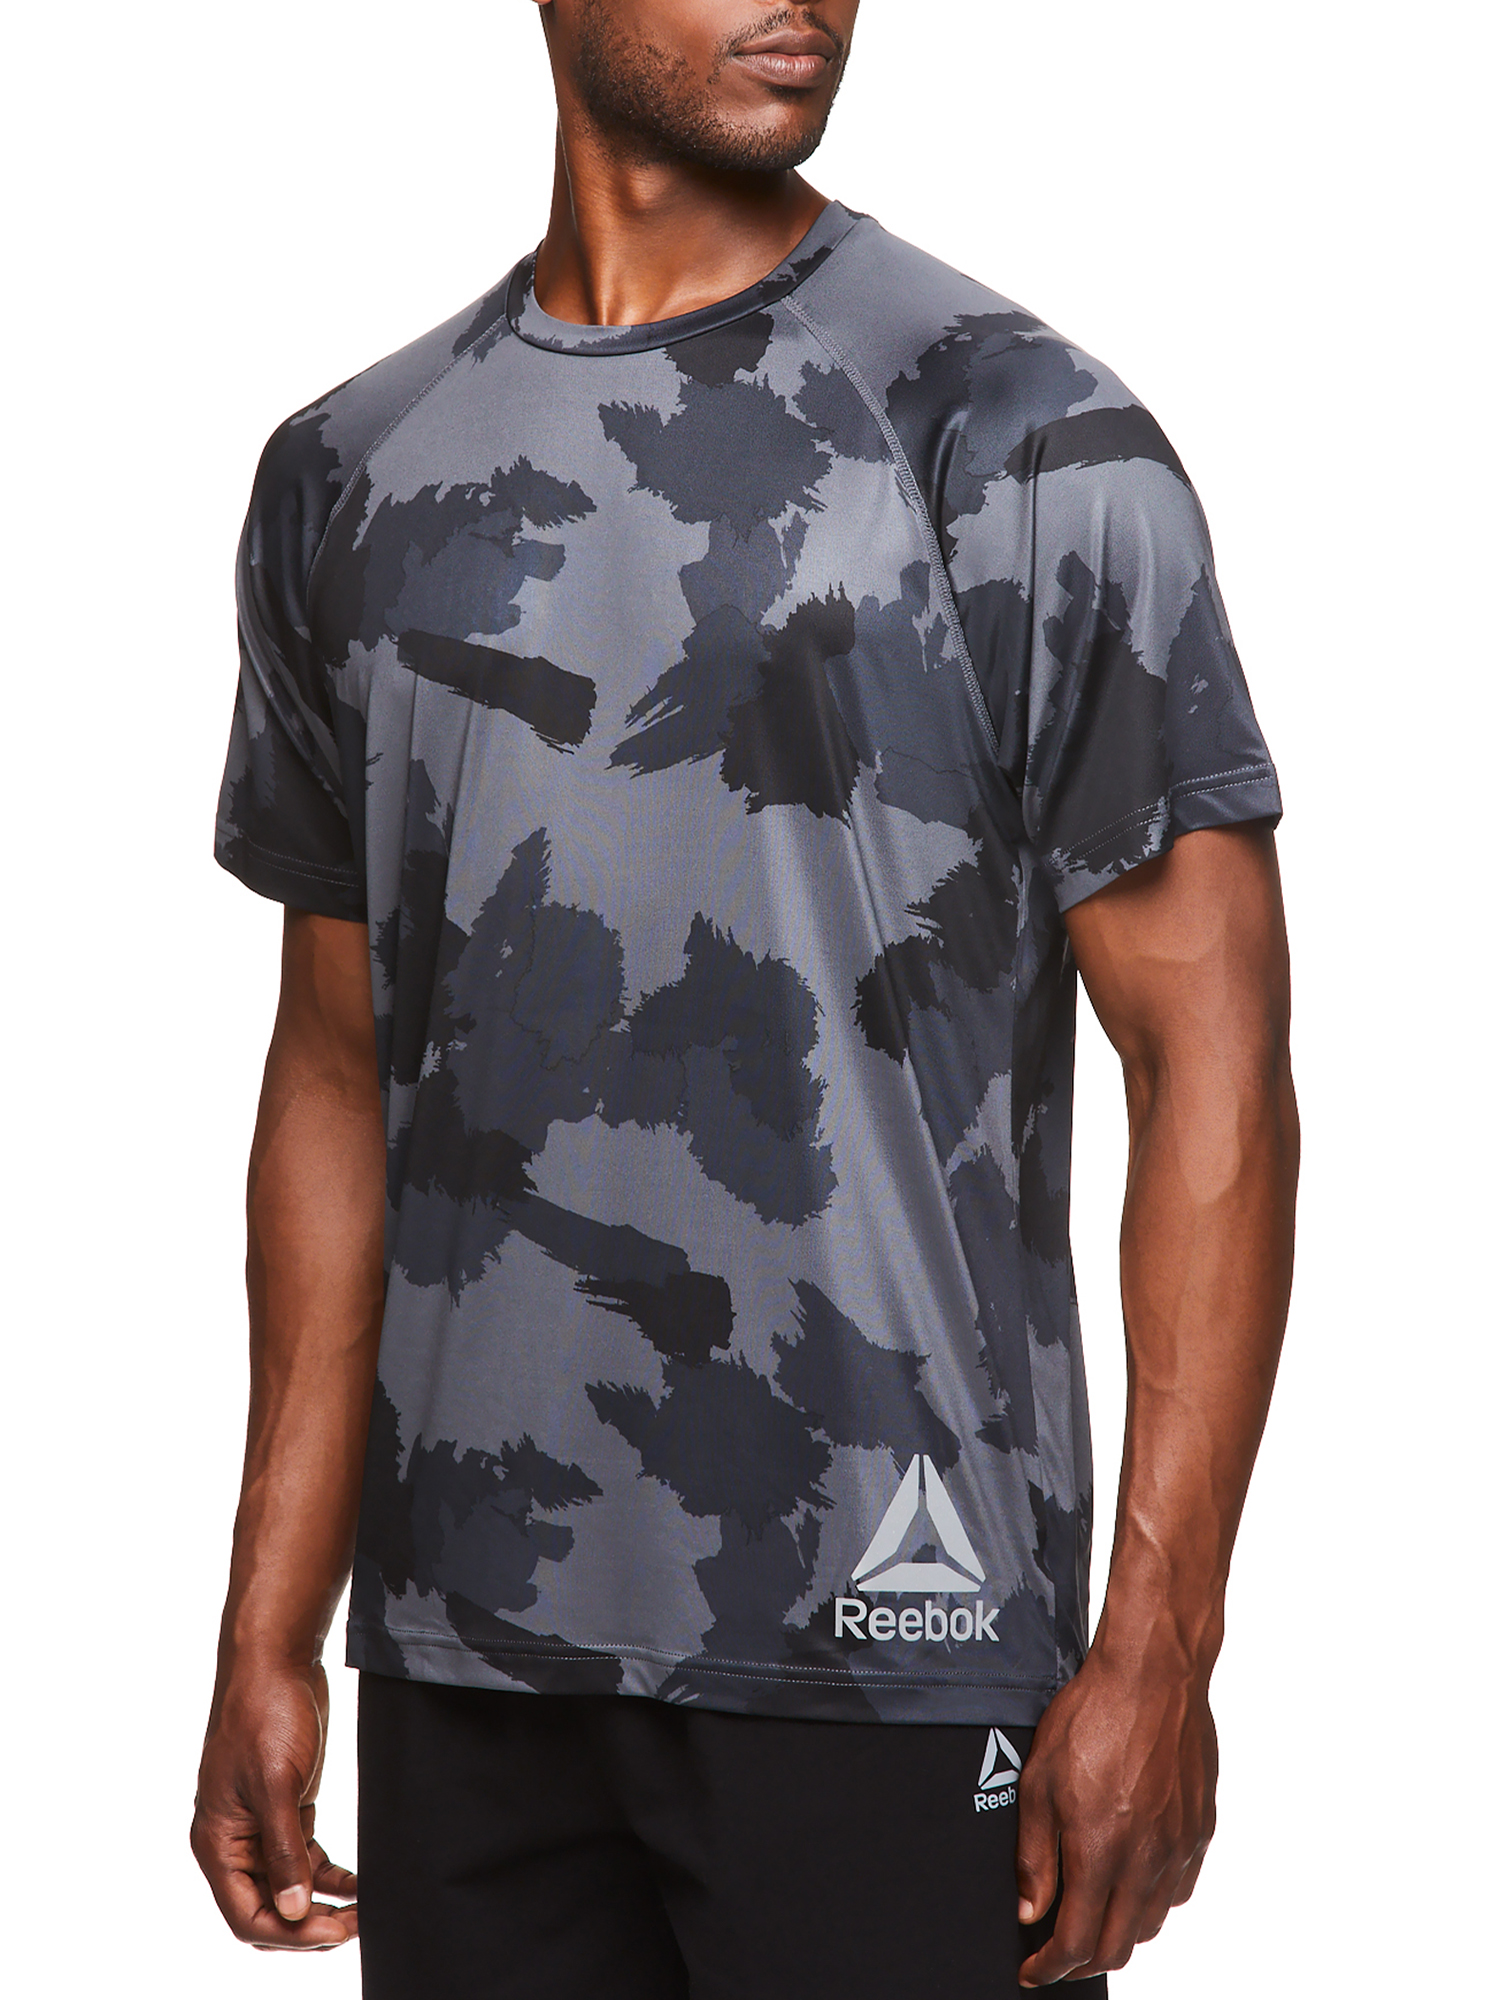 Reebok Men's and Big Men's Active Short Sleeve Duration Performance Tee, up to Size 3XL - image 2 of 4